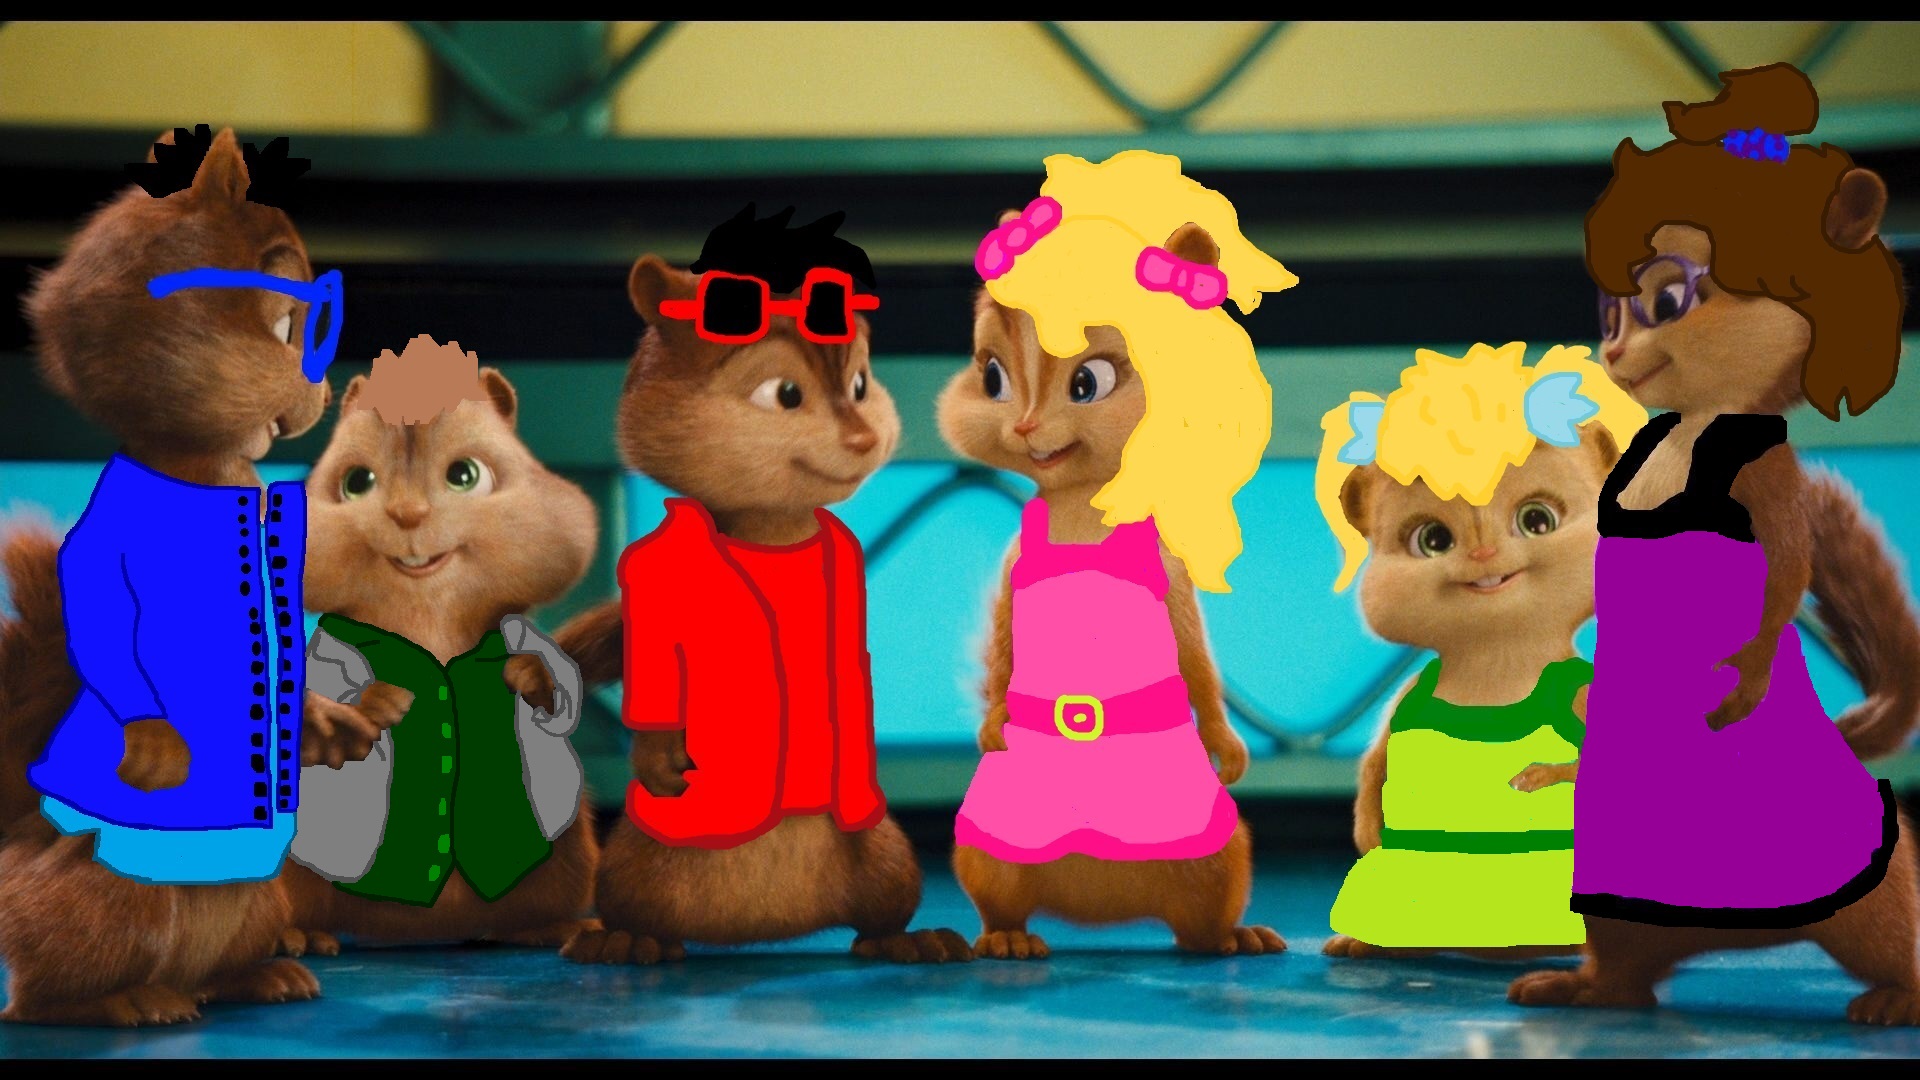 chipmucks-and-chipettes-the-chipettes-33720567-1920-1080